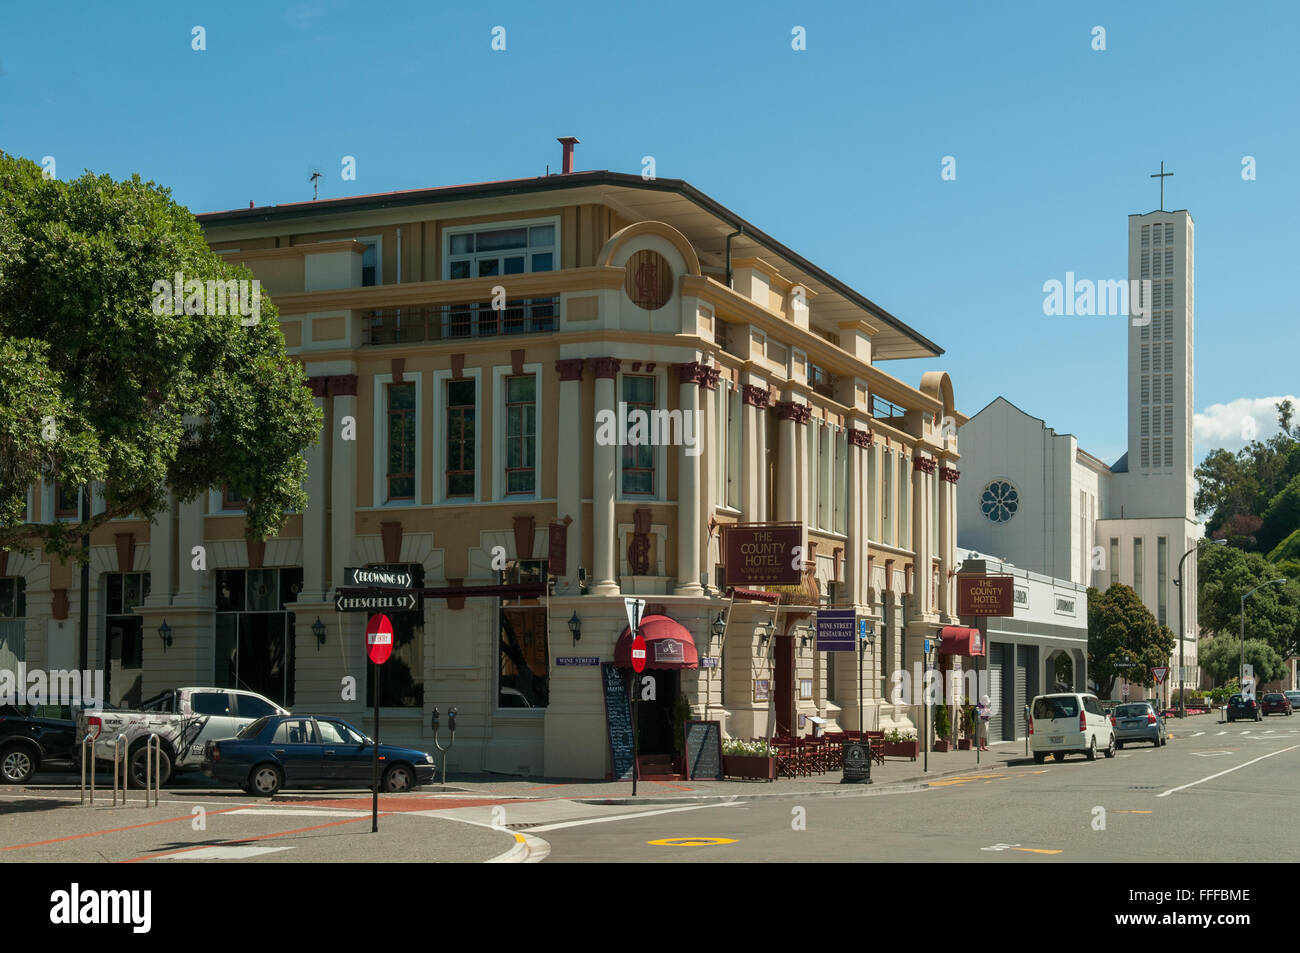 County Hotel and Cathedral, Napier, Hawke's Bay, New Zealand Stock Photo